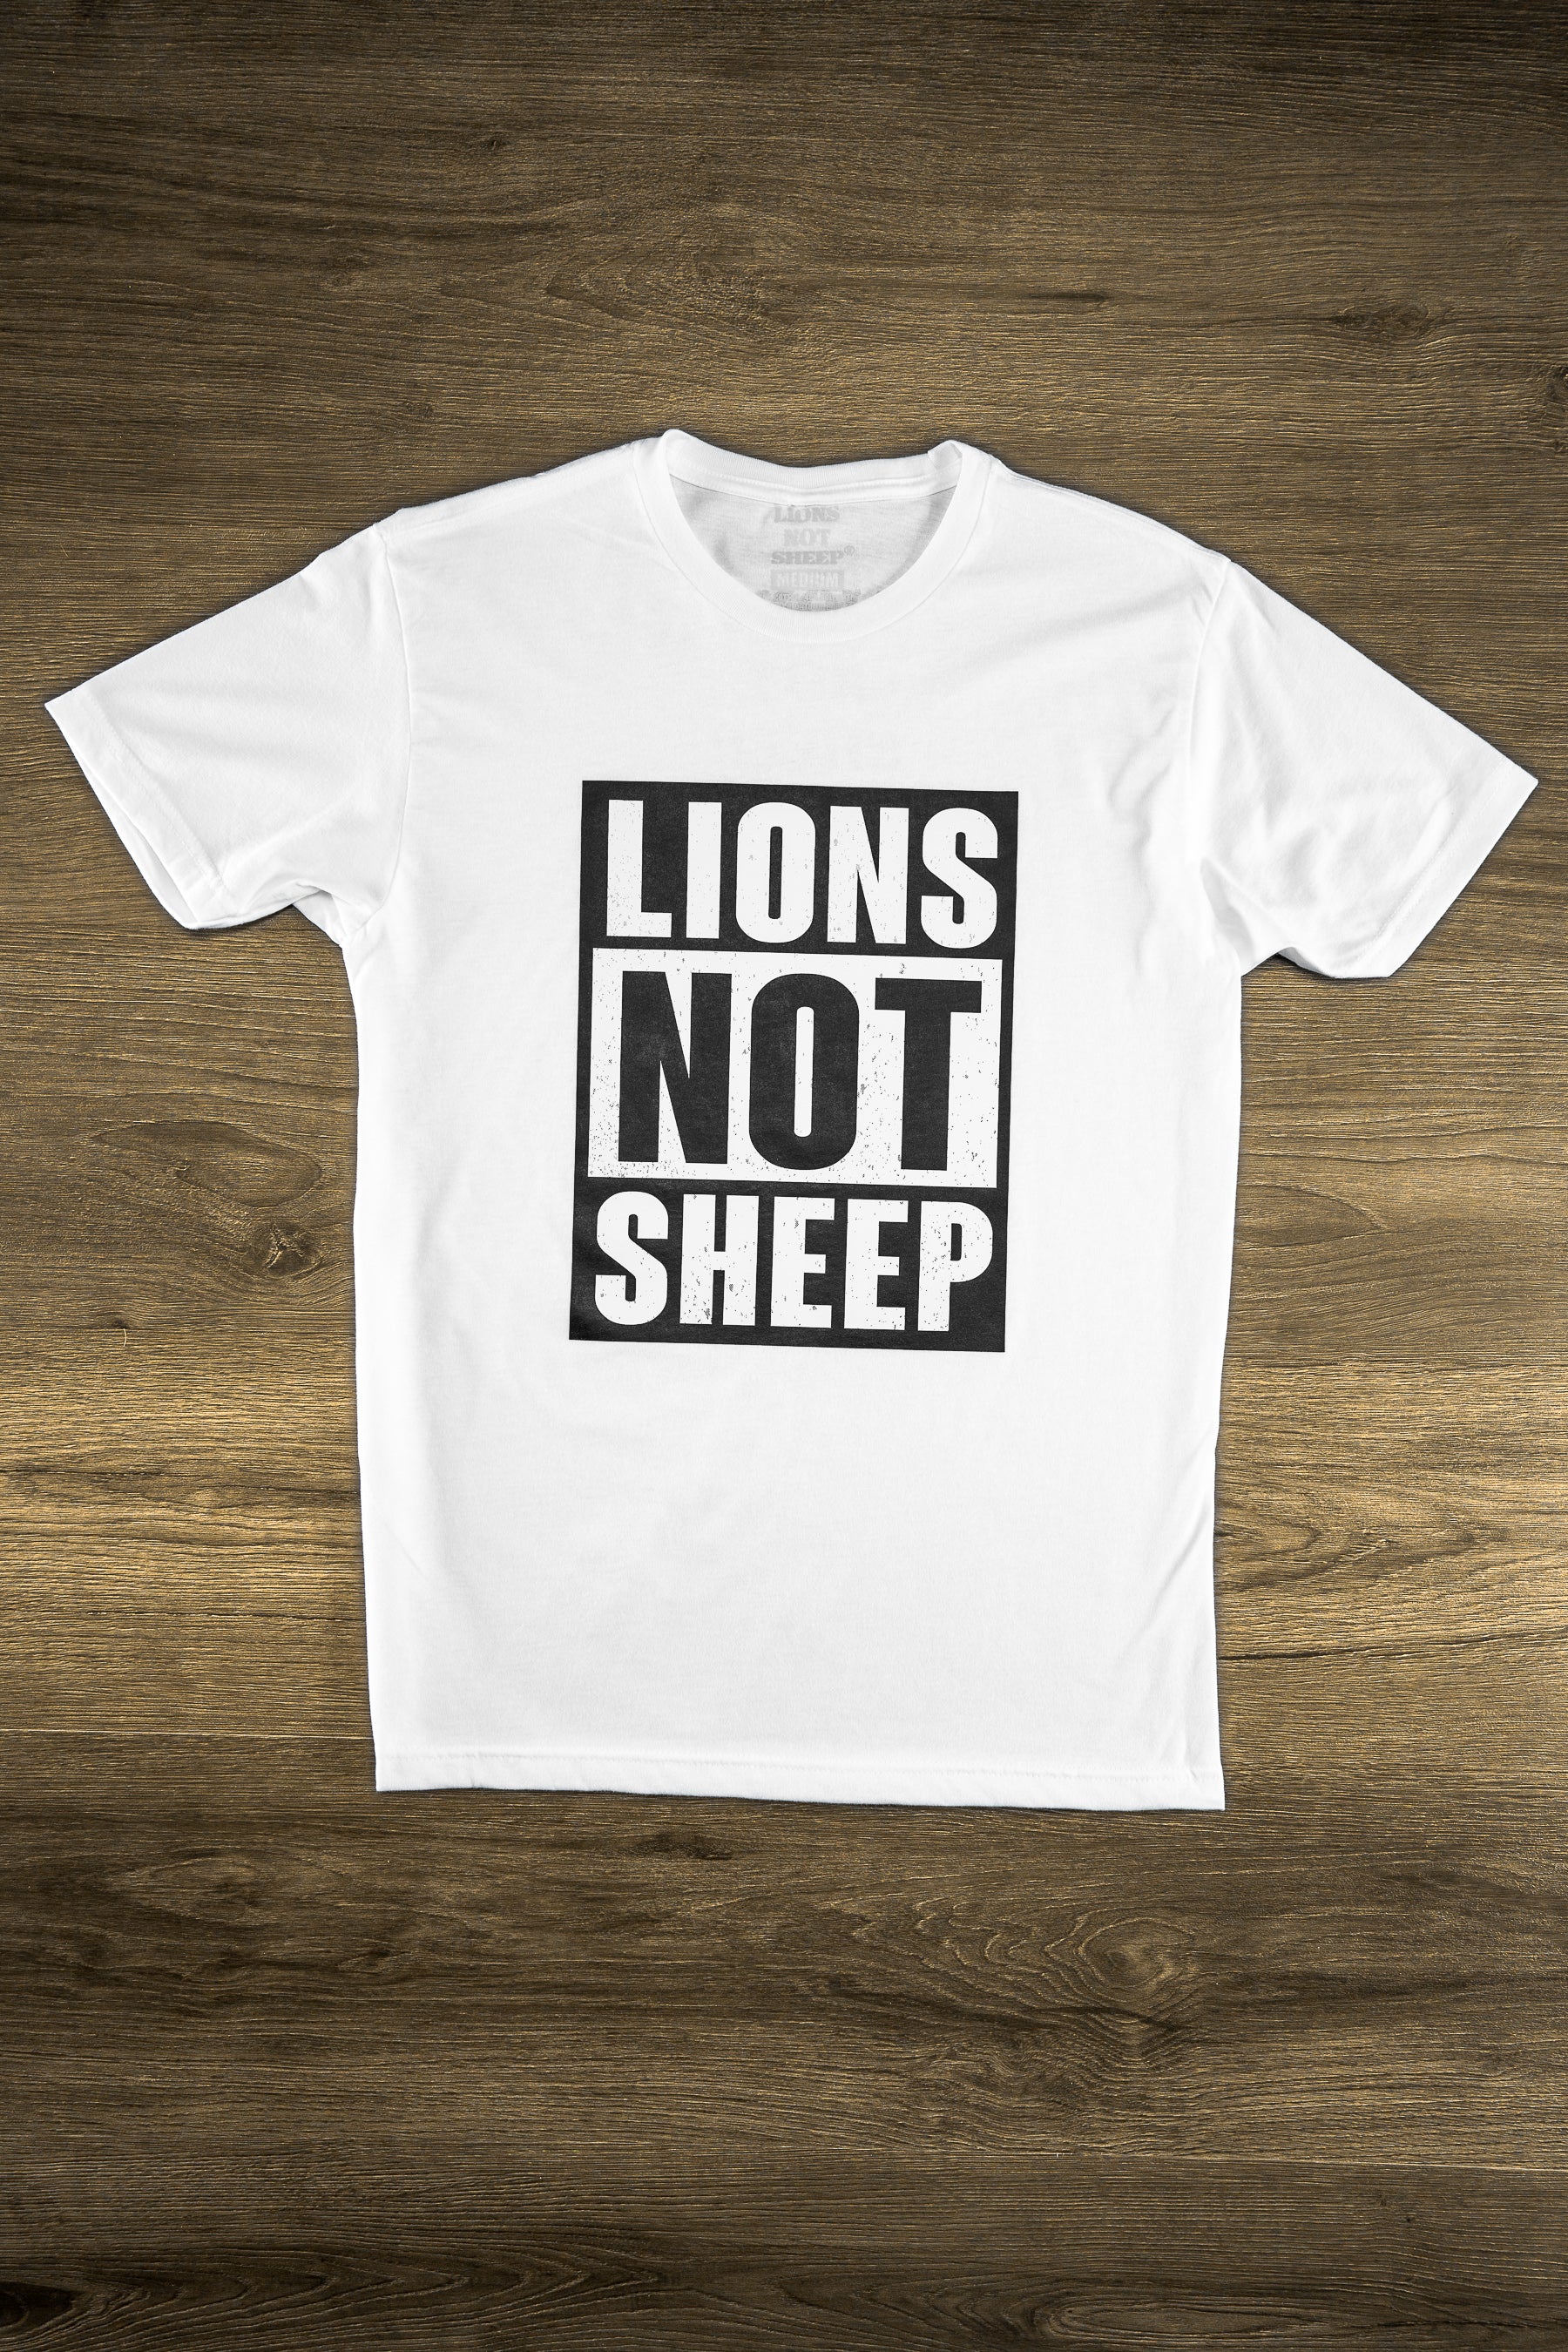 LIONS NOT SHEEP "STRAIGHT OUTTA" Tee - Lions Not Sheep ®